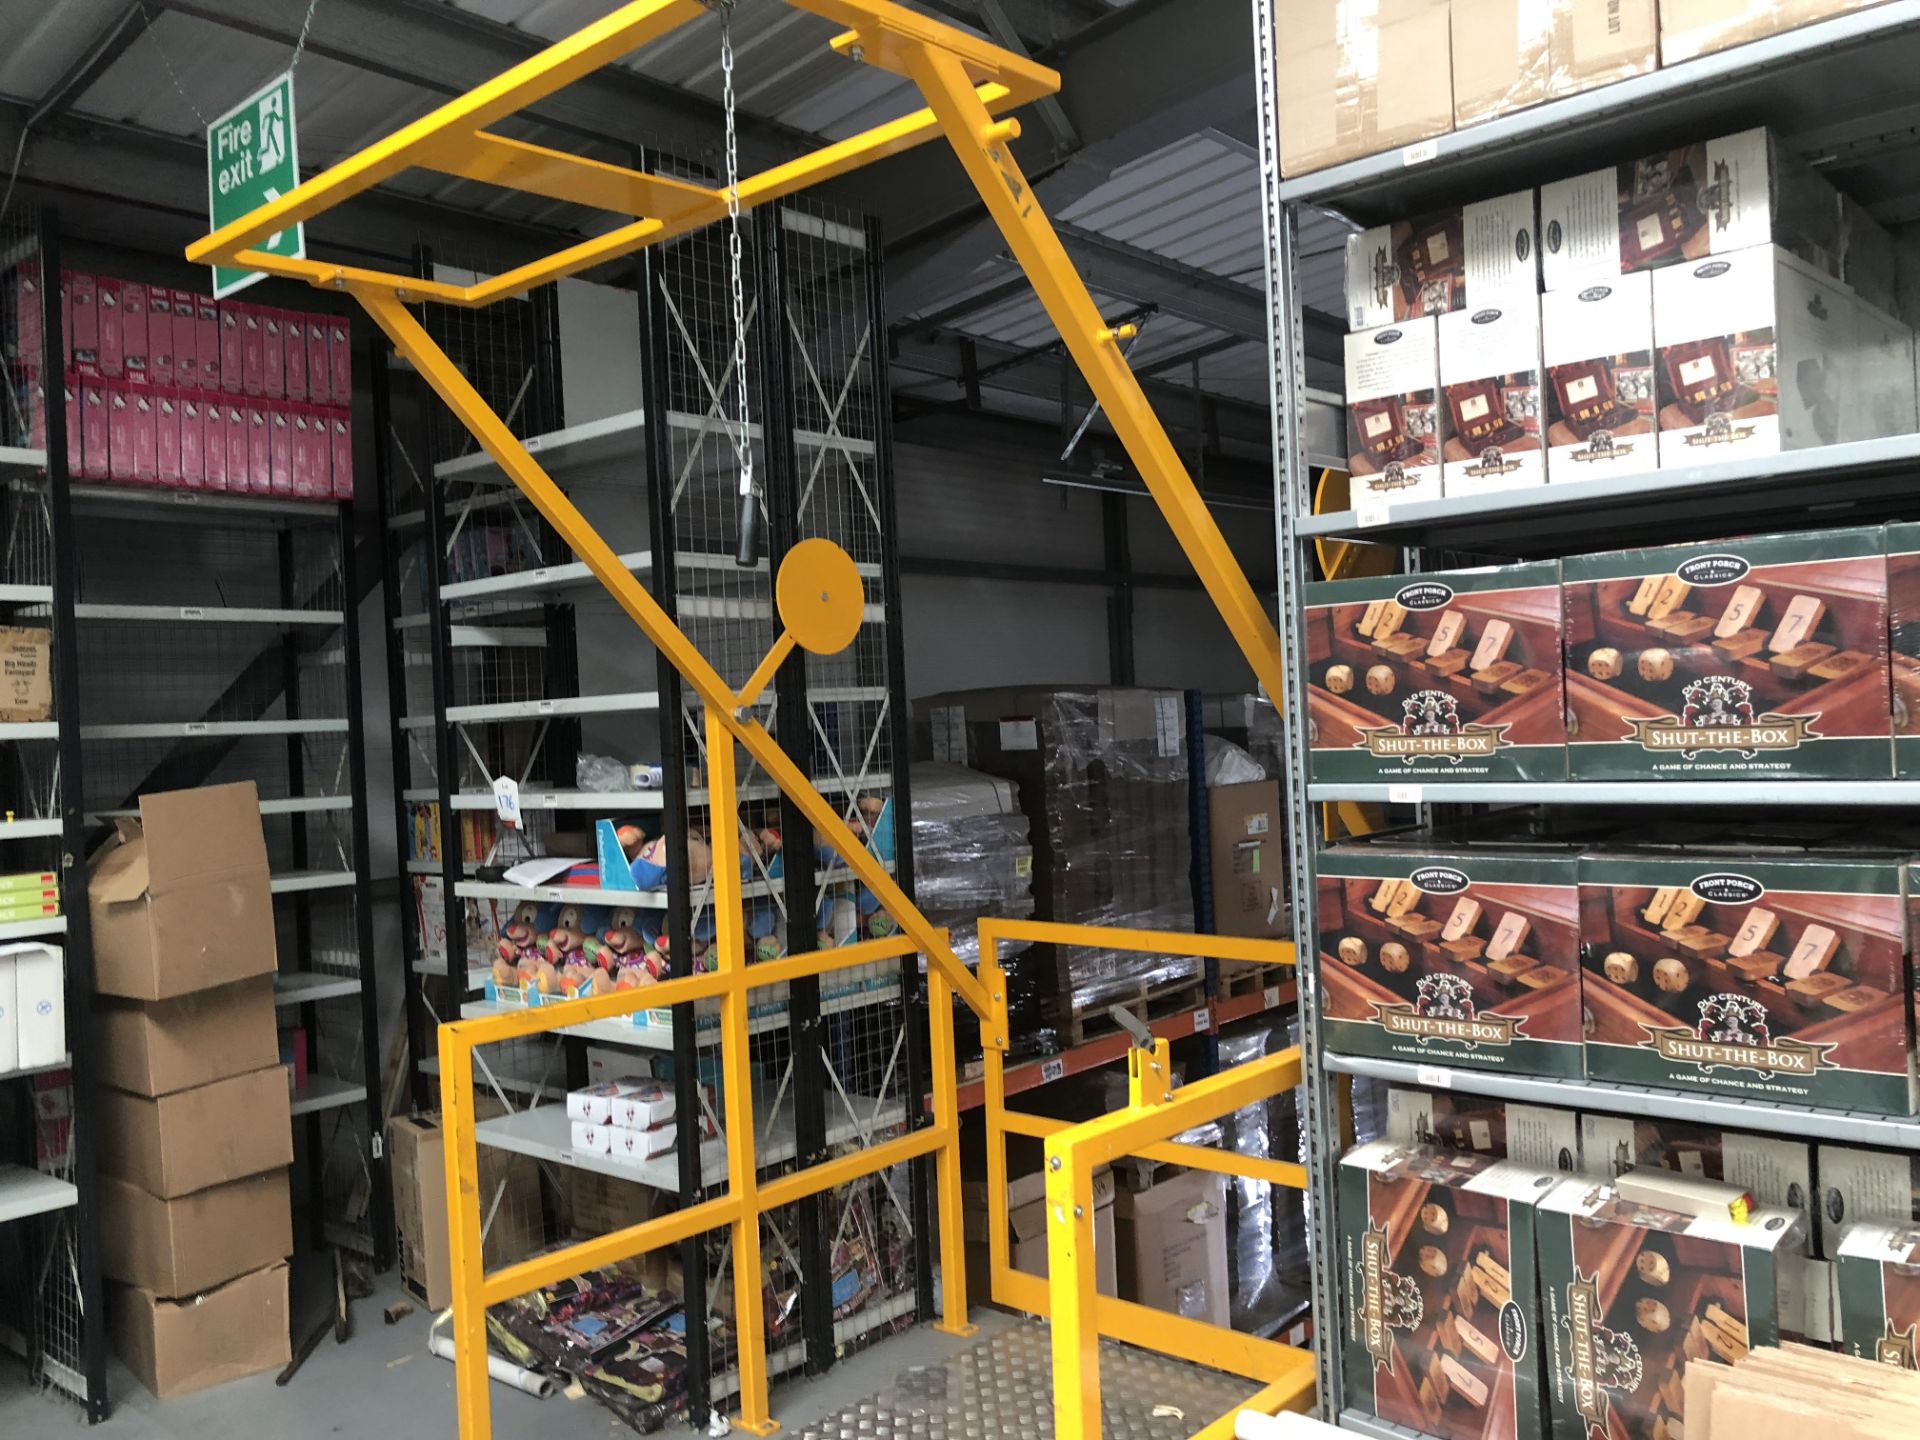 Mezzanine floor 19.7 x 19.4 m incl. 2 x pedestrian staircases, 2 x pallet safety cages, see more… - Image 4 of 7